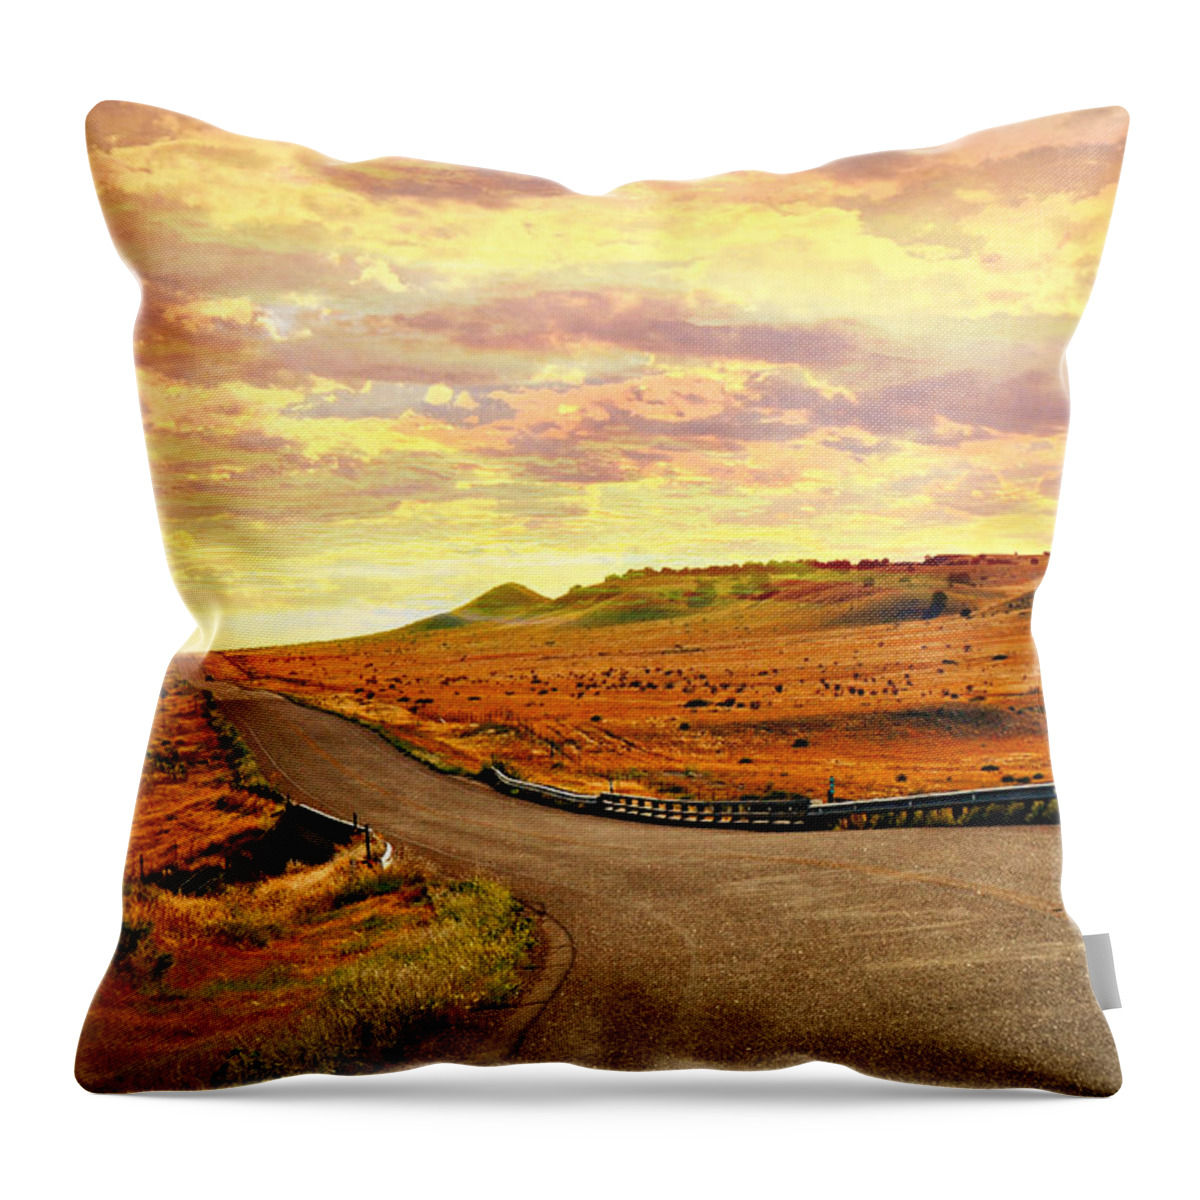 Sunset Throw Pillow featuring the photograph The Road Less Trraveled Sunset by Marty Koch